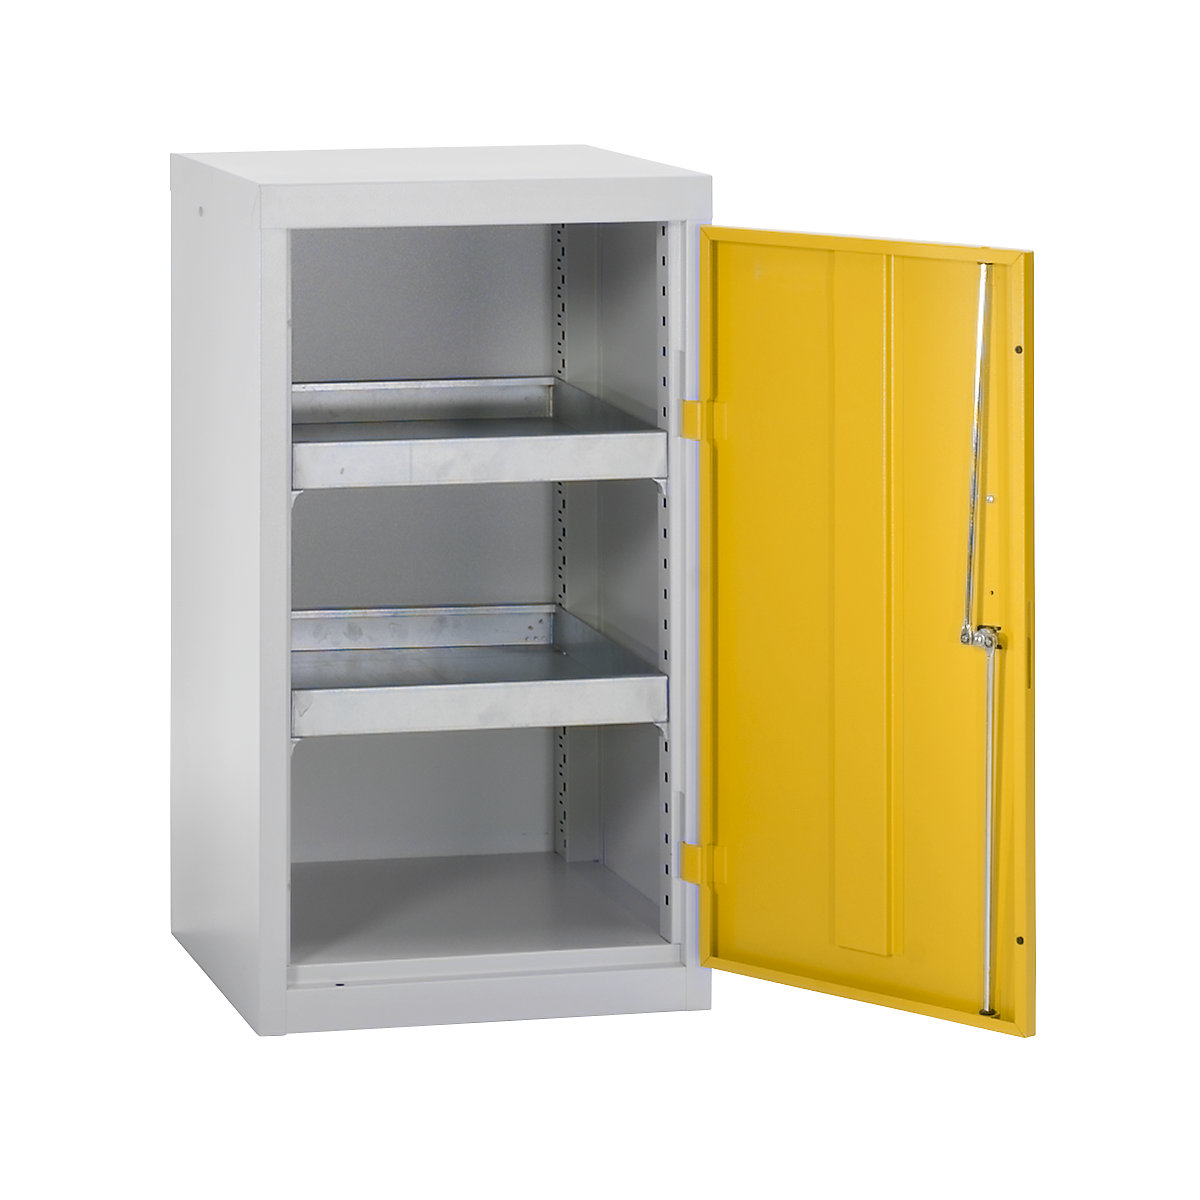 Environmental cupboard without door perforations, HxWxD 900 x 500 x 500 mm, 2 tray shelves, light grey / signal yellow-4